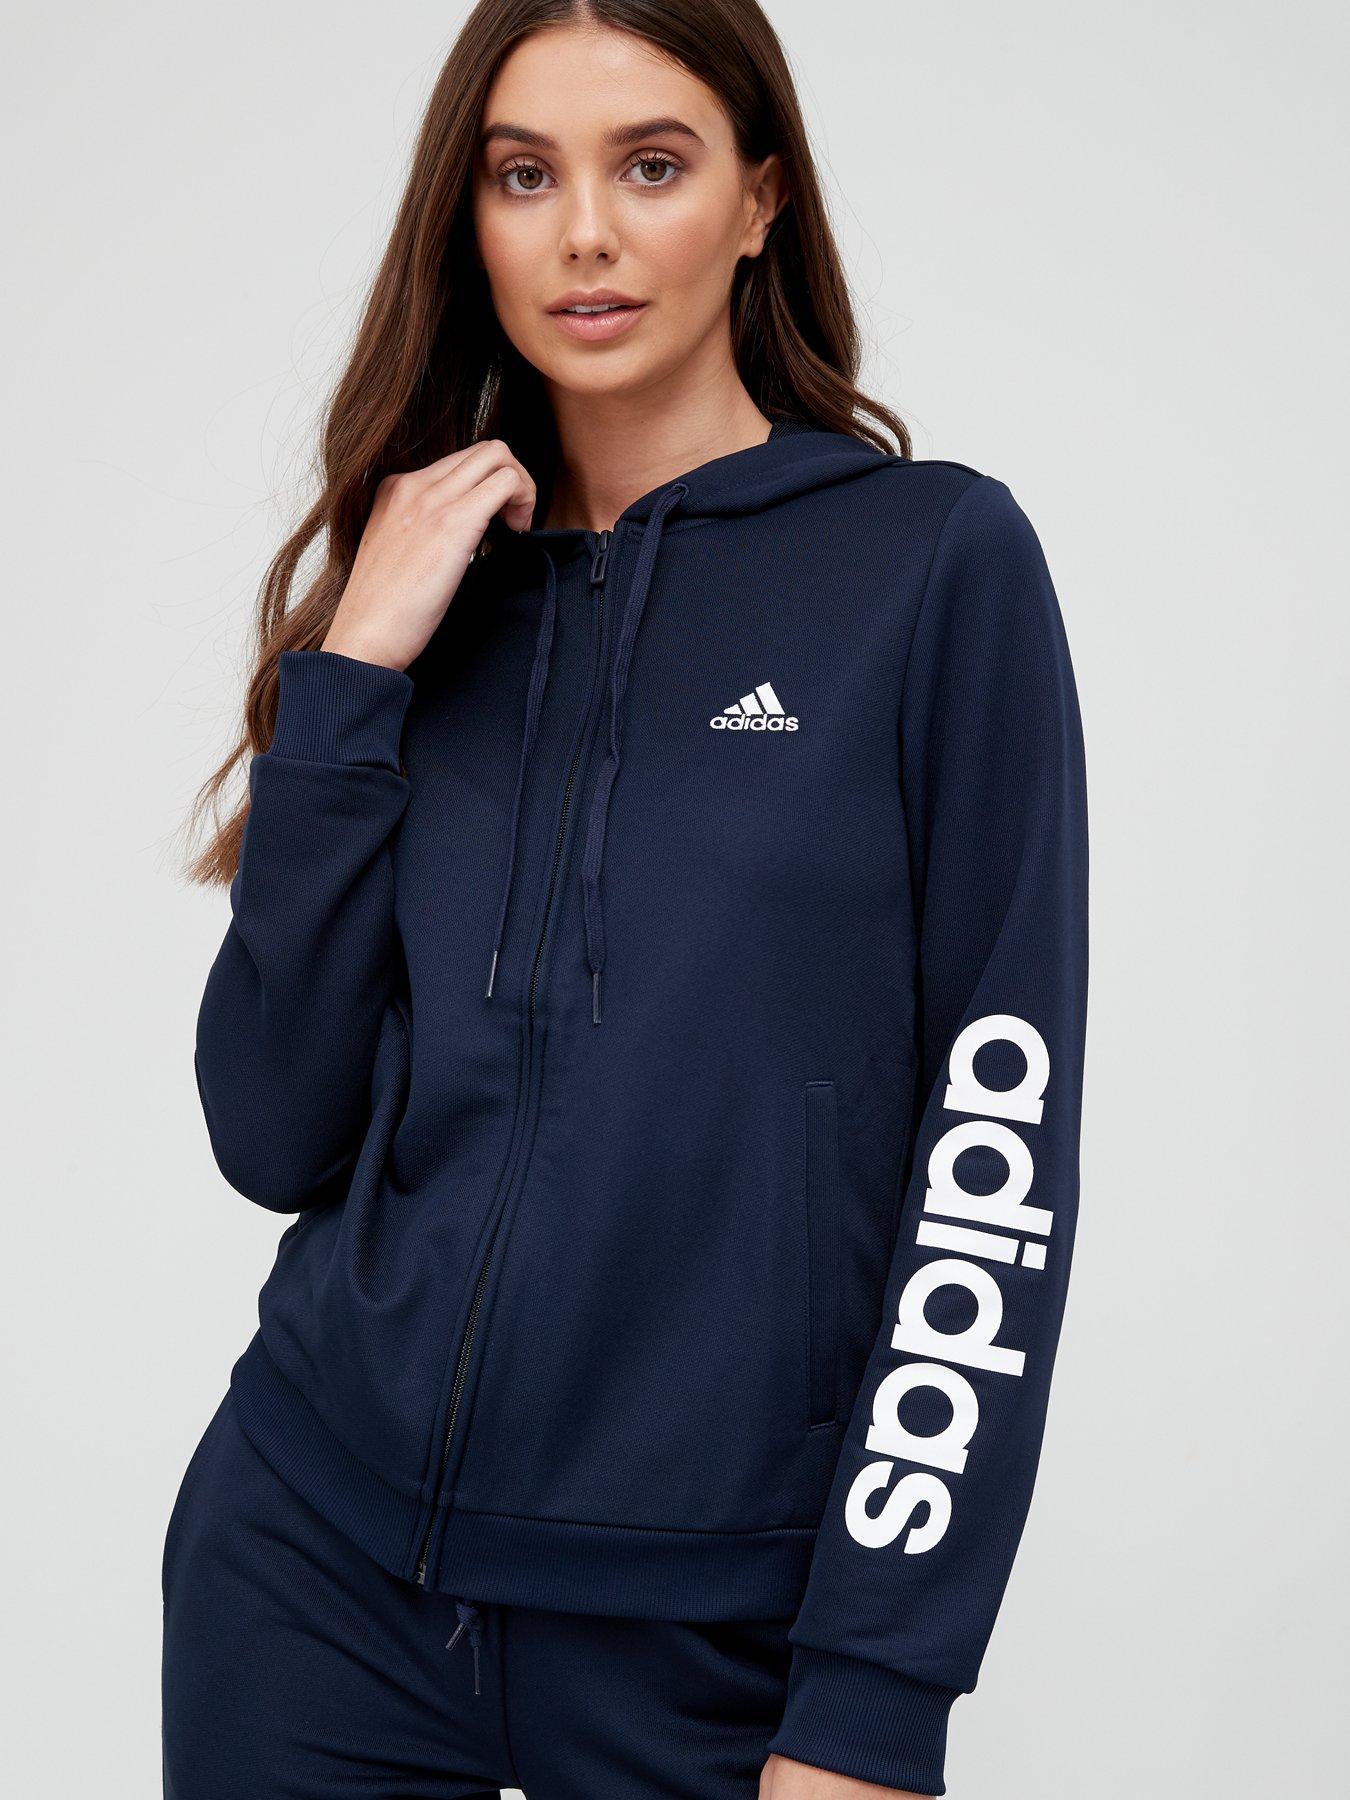  Essentials Linear Tracksuit - Navy/White